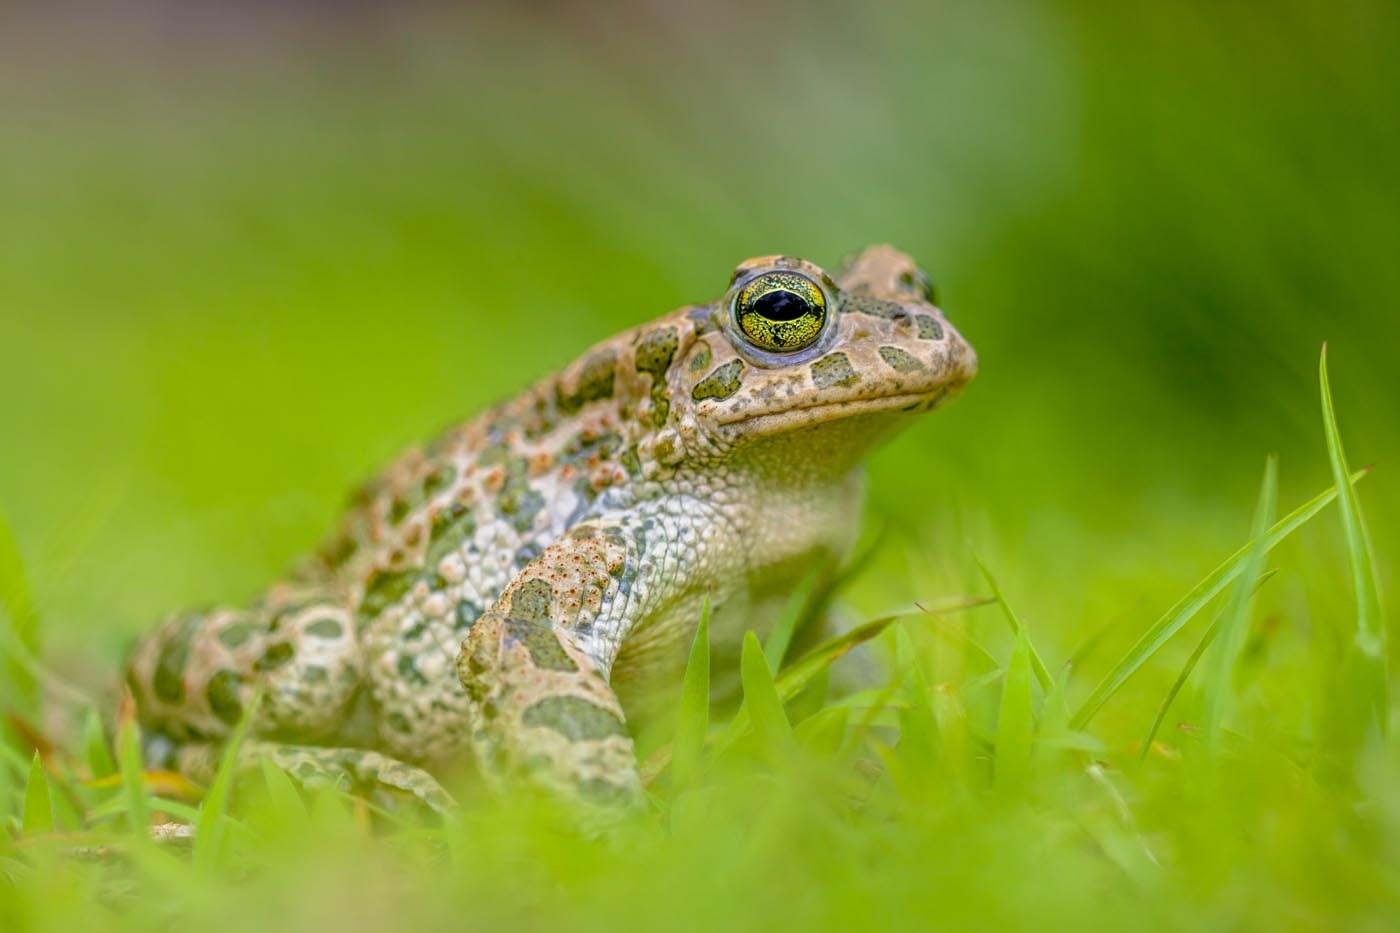 firm-green-toad-in-bright-green-grass